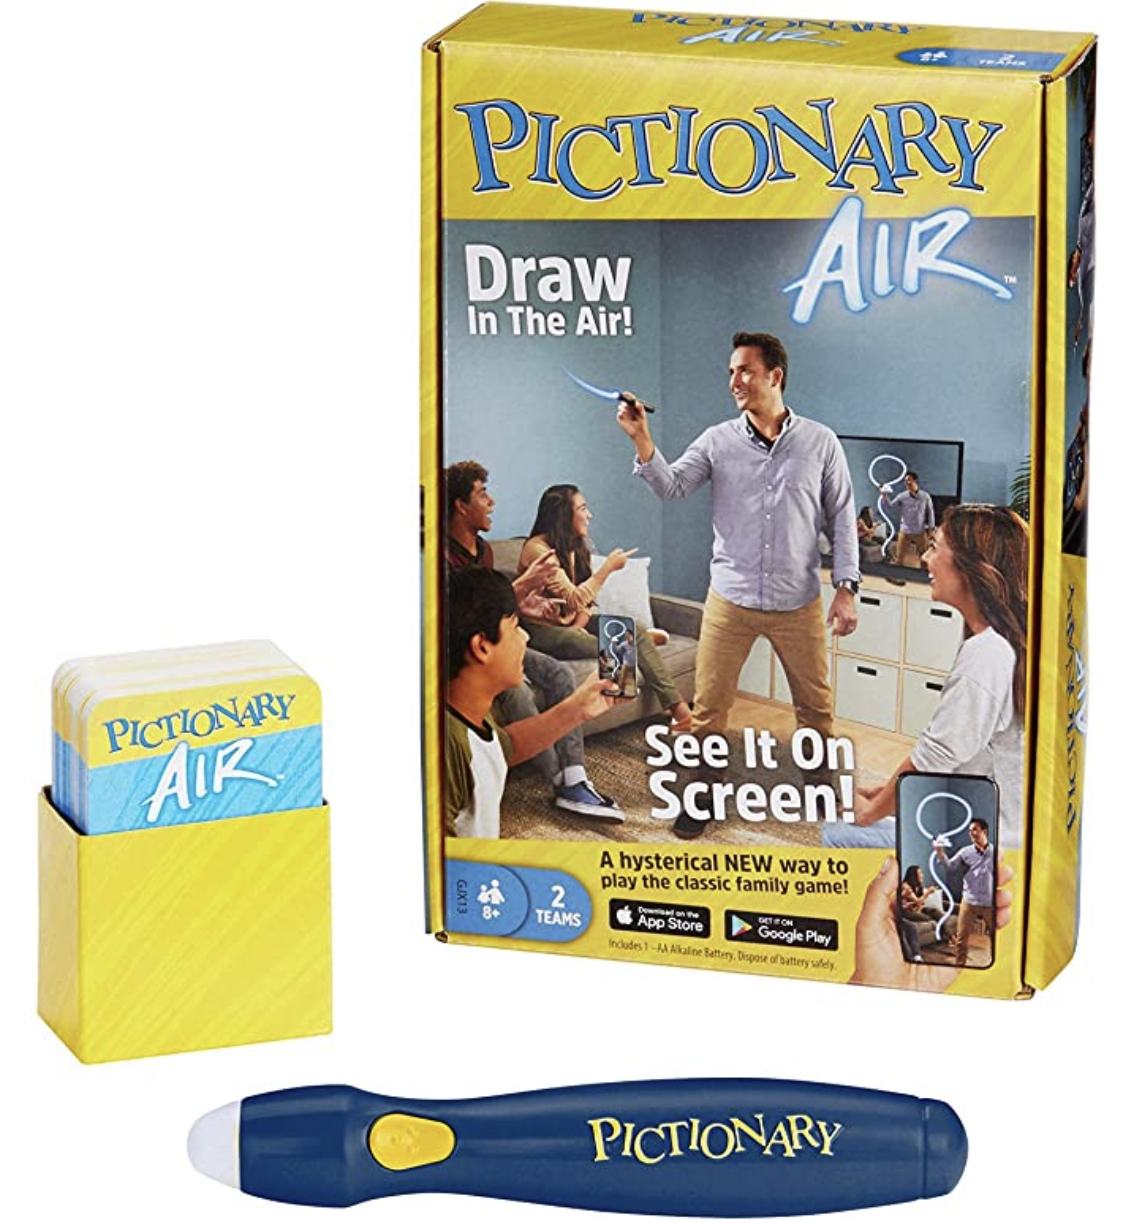 Image of Pictionary-air game